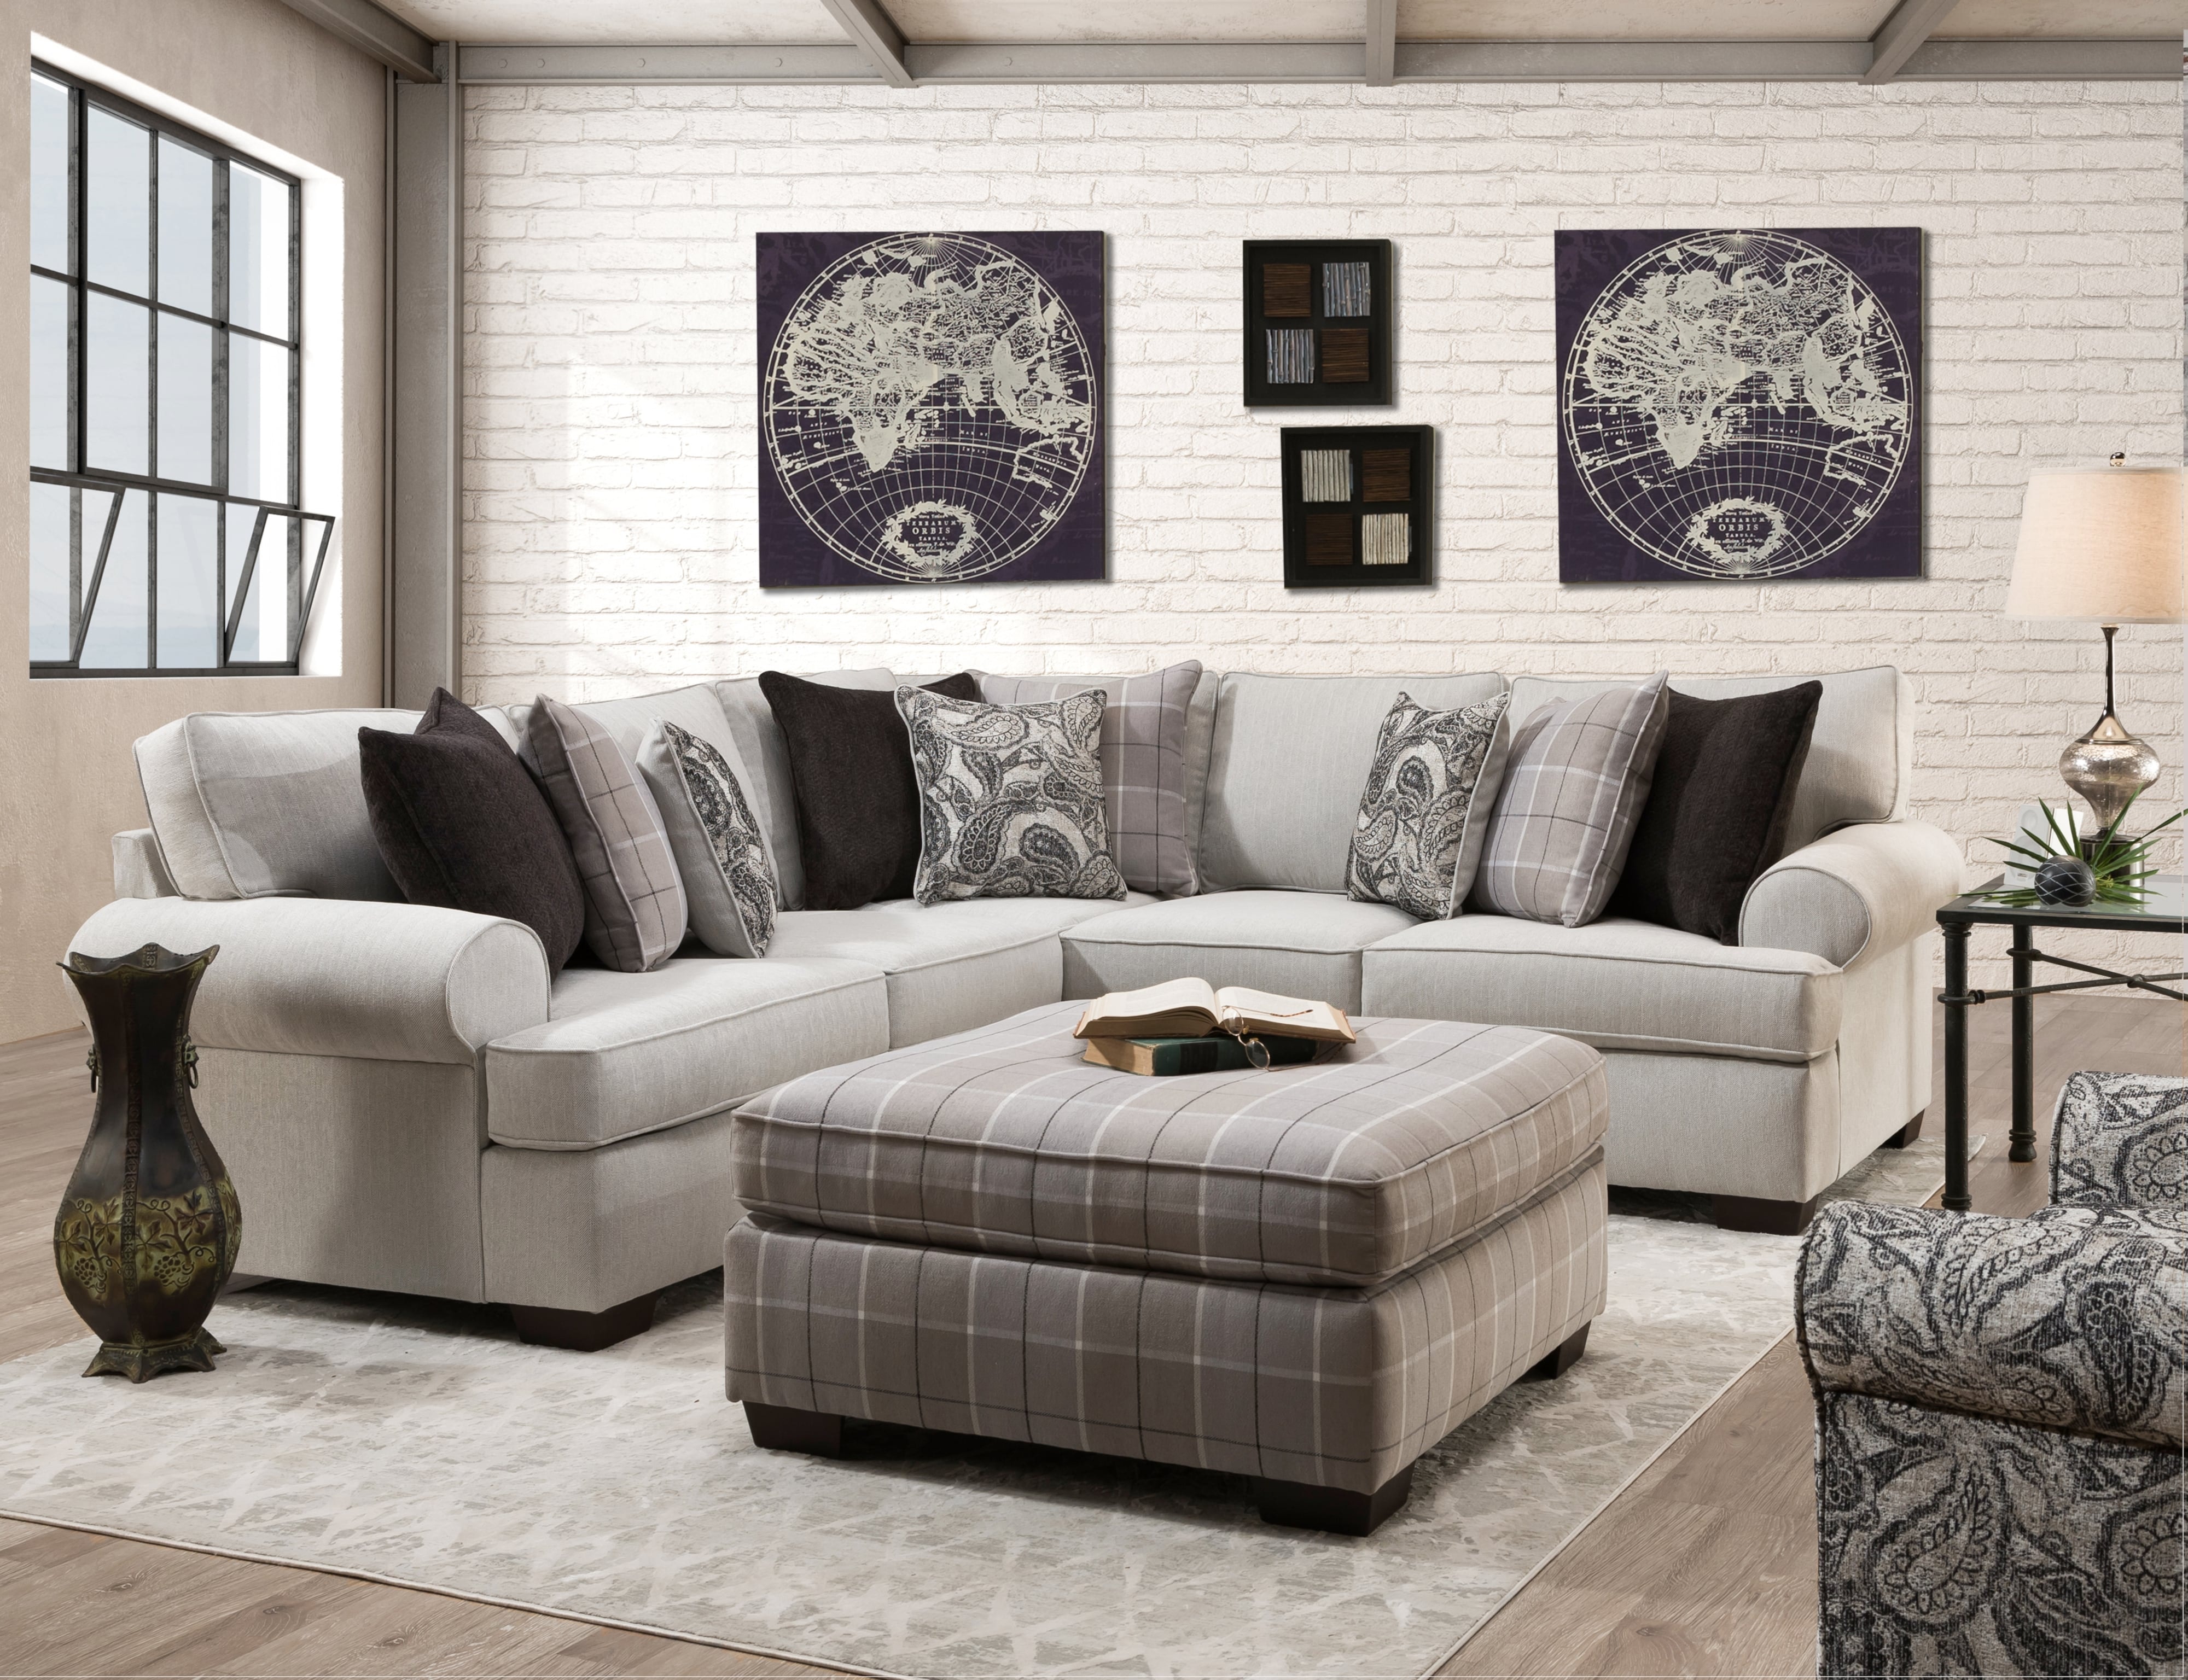 Behold Home 2301 Cooper 2301-08-1711-01x1+2301-05-1711-01x1 Contemporary  2-Piece Sectional Sofa with Rolled Arms Schewels Home Sectional Sofa  Groups